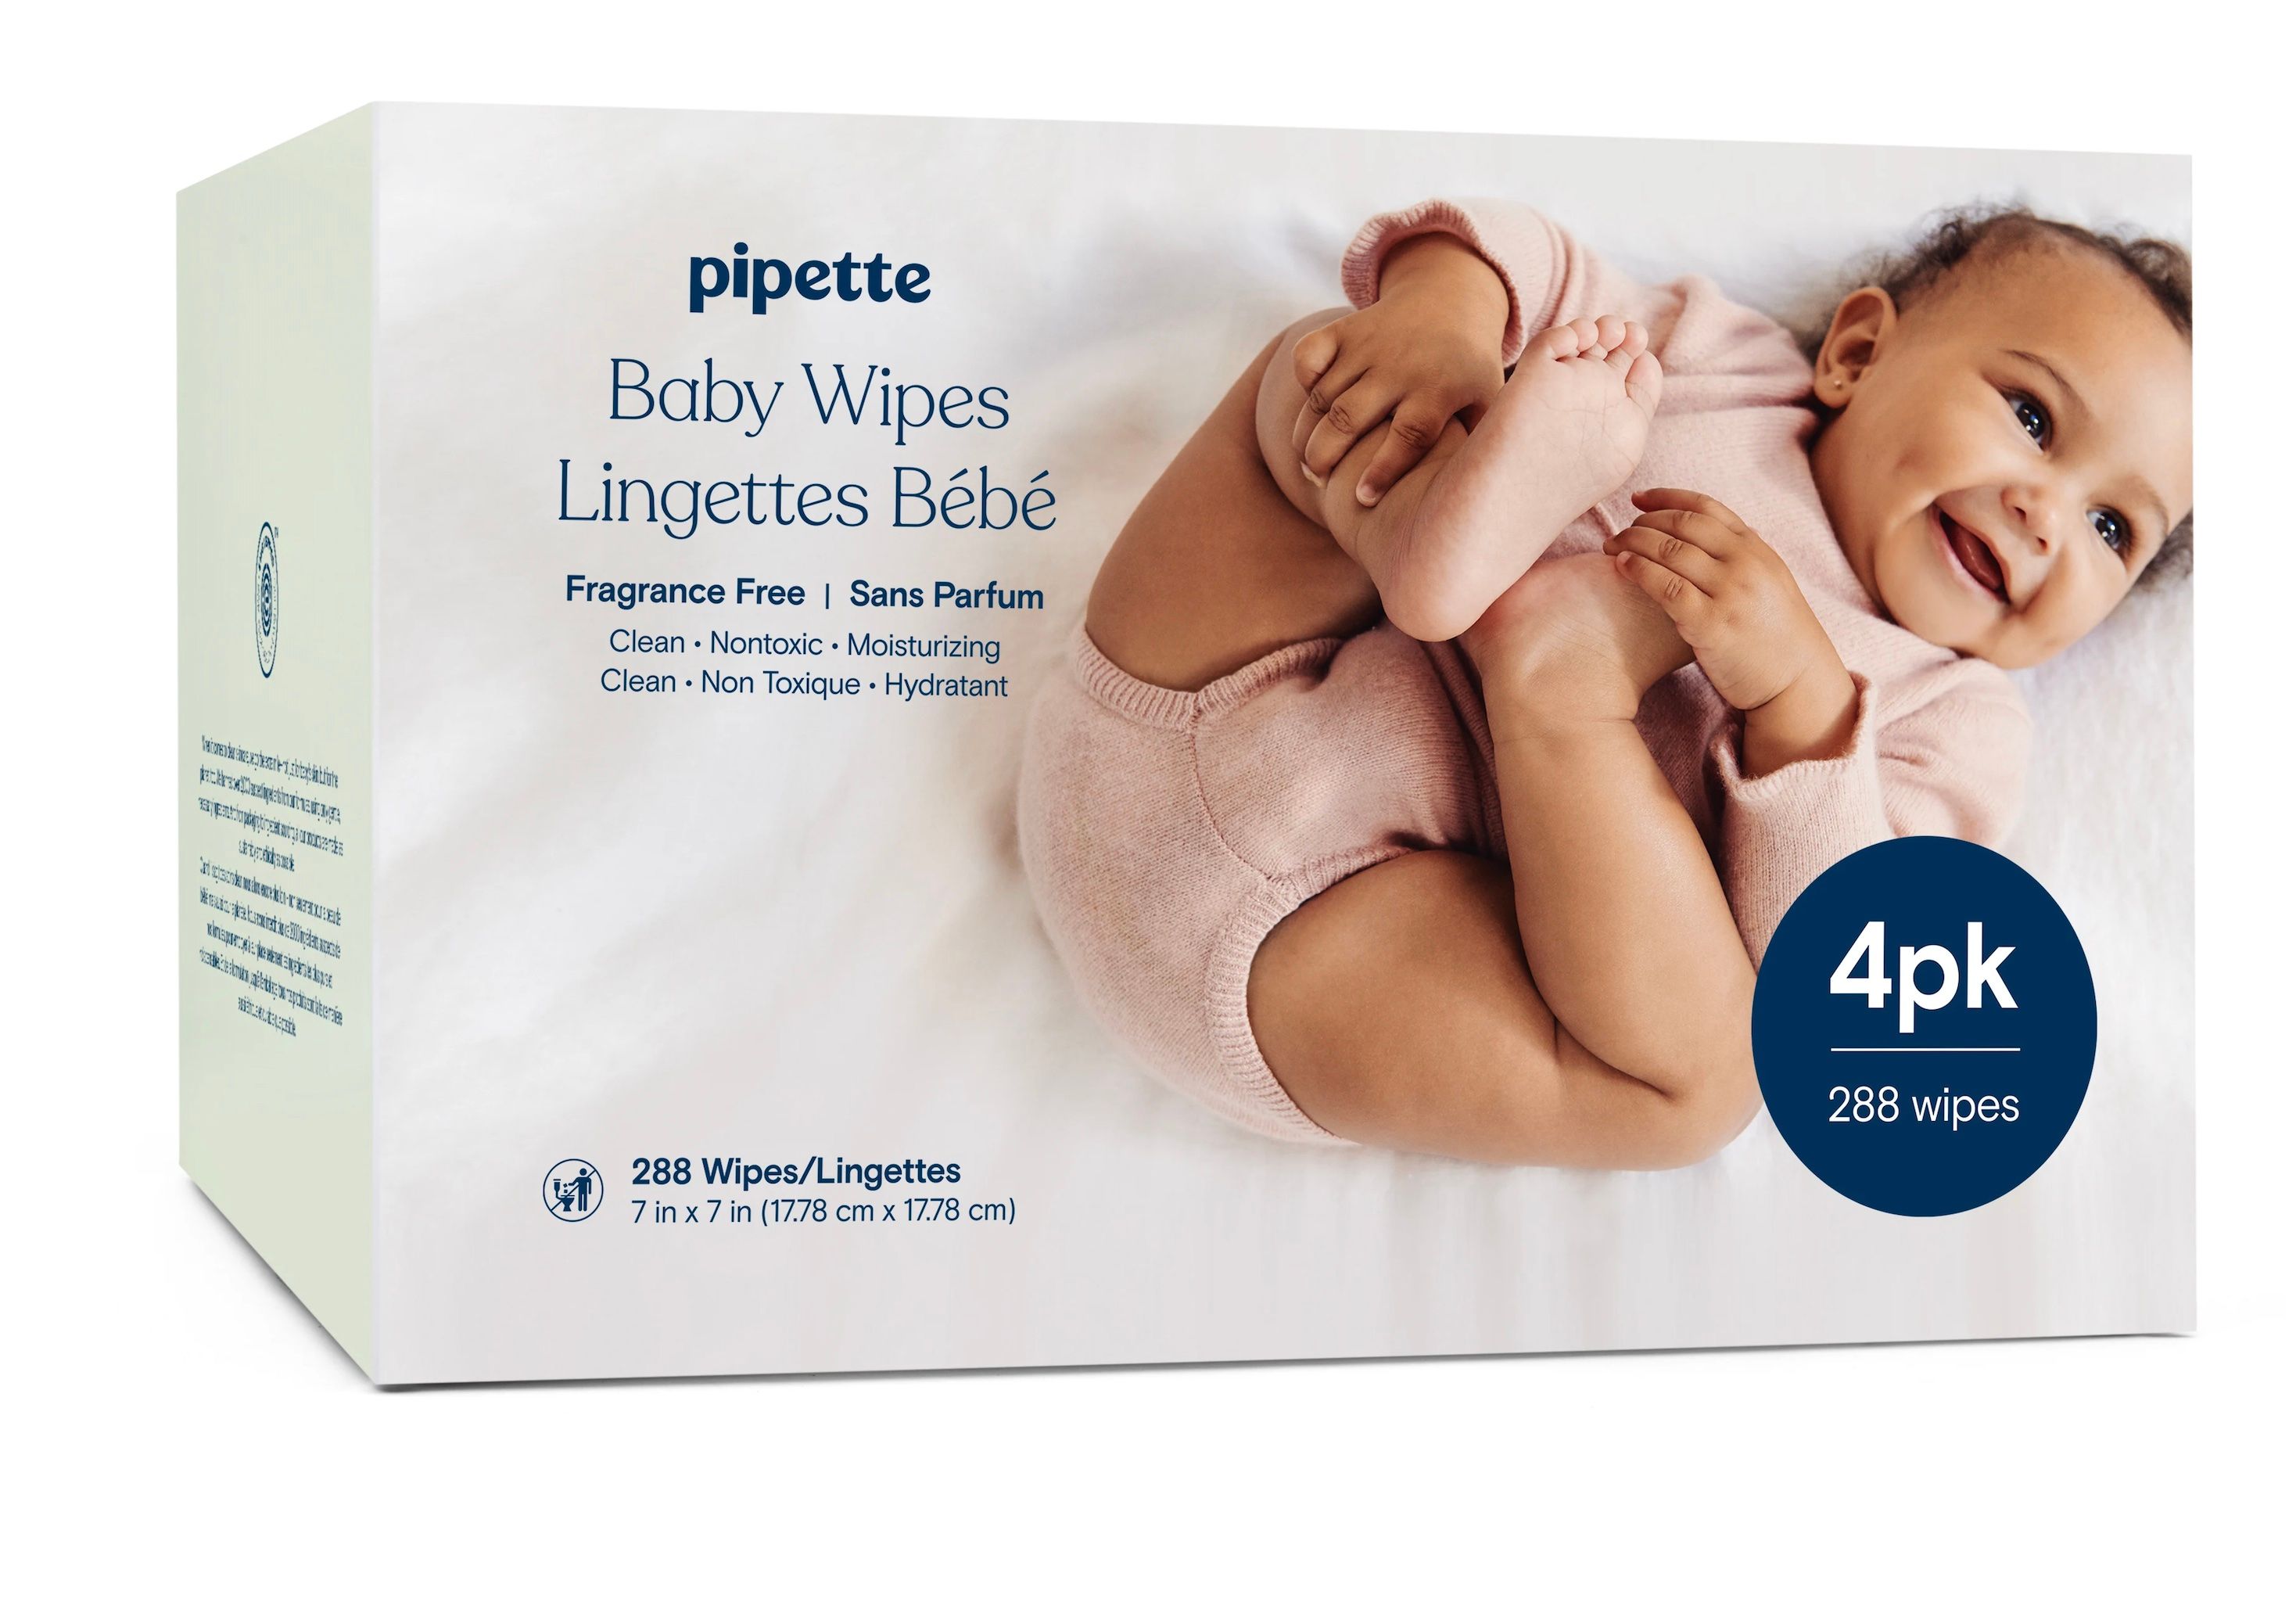 DISCPipette Baby Wipes, 4 pack - 288 ct